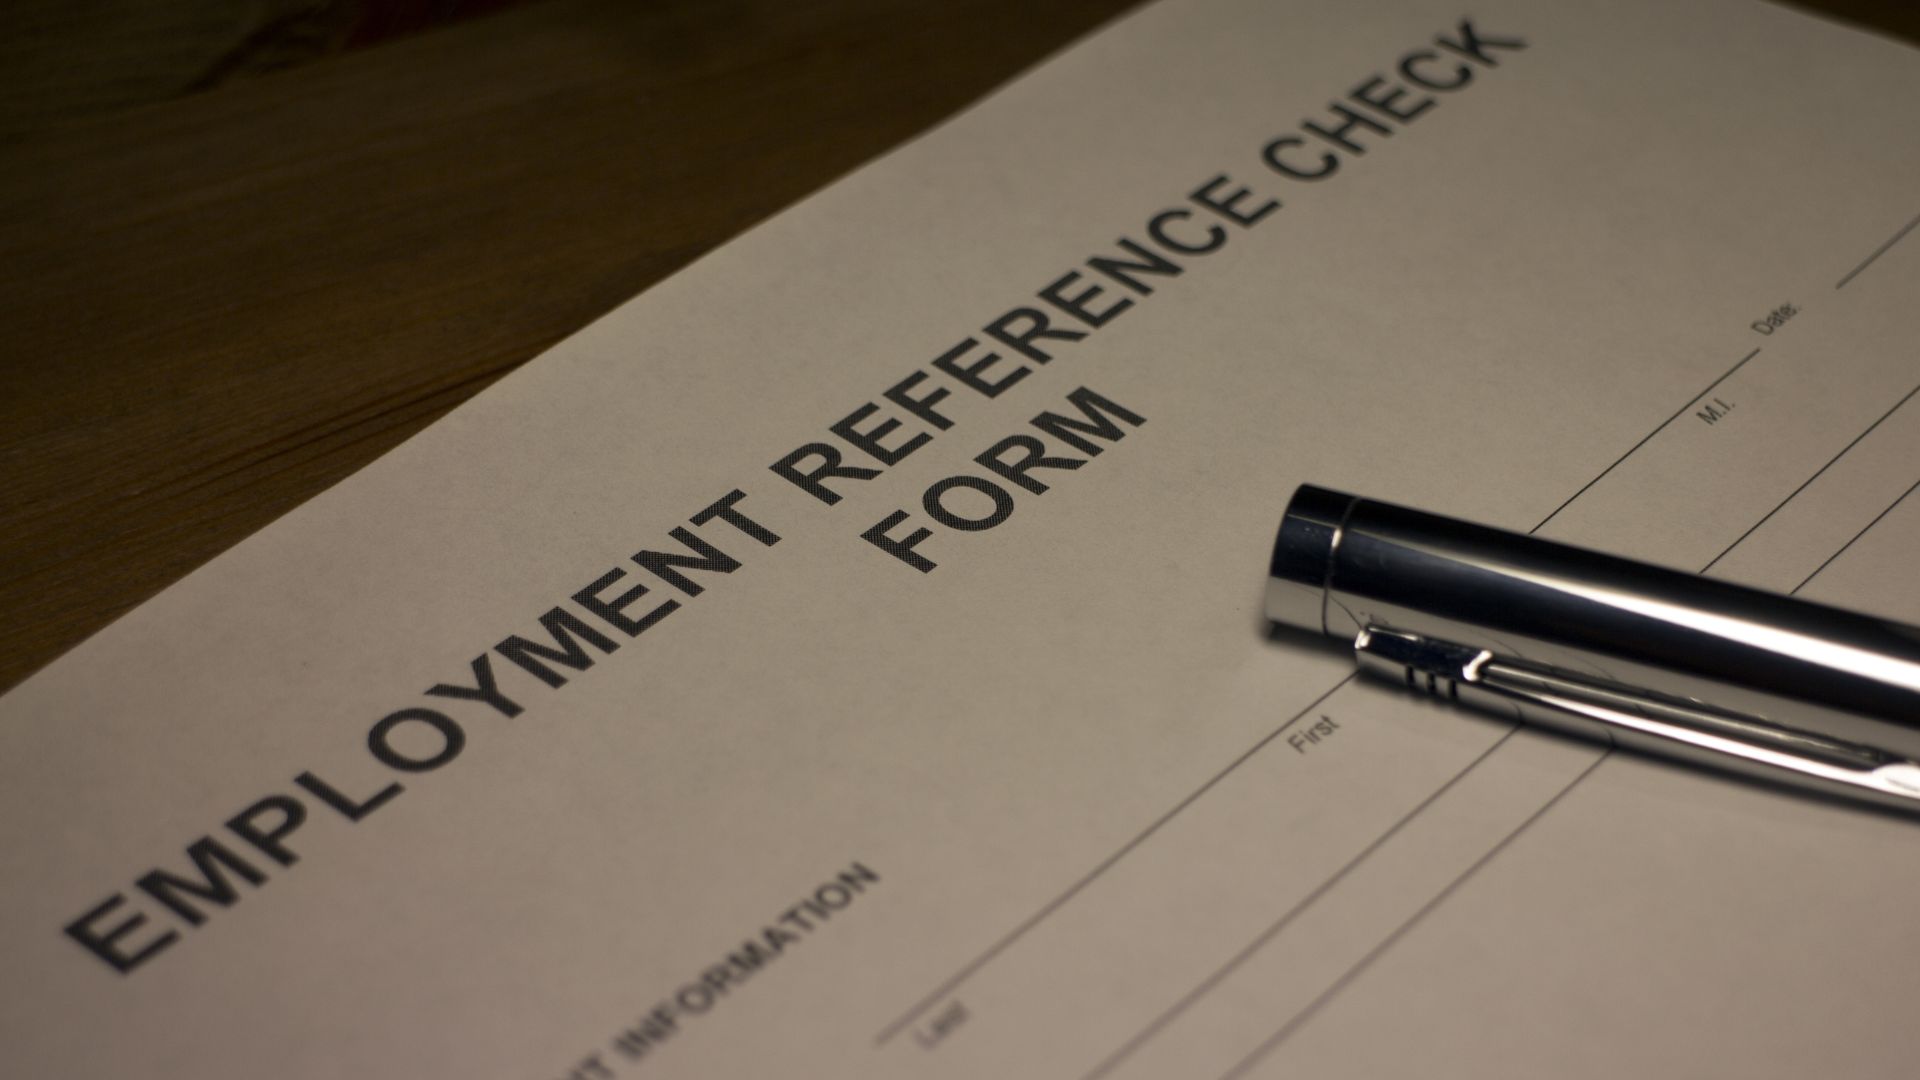 A job reference form with a pen